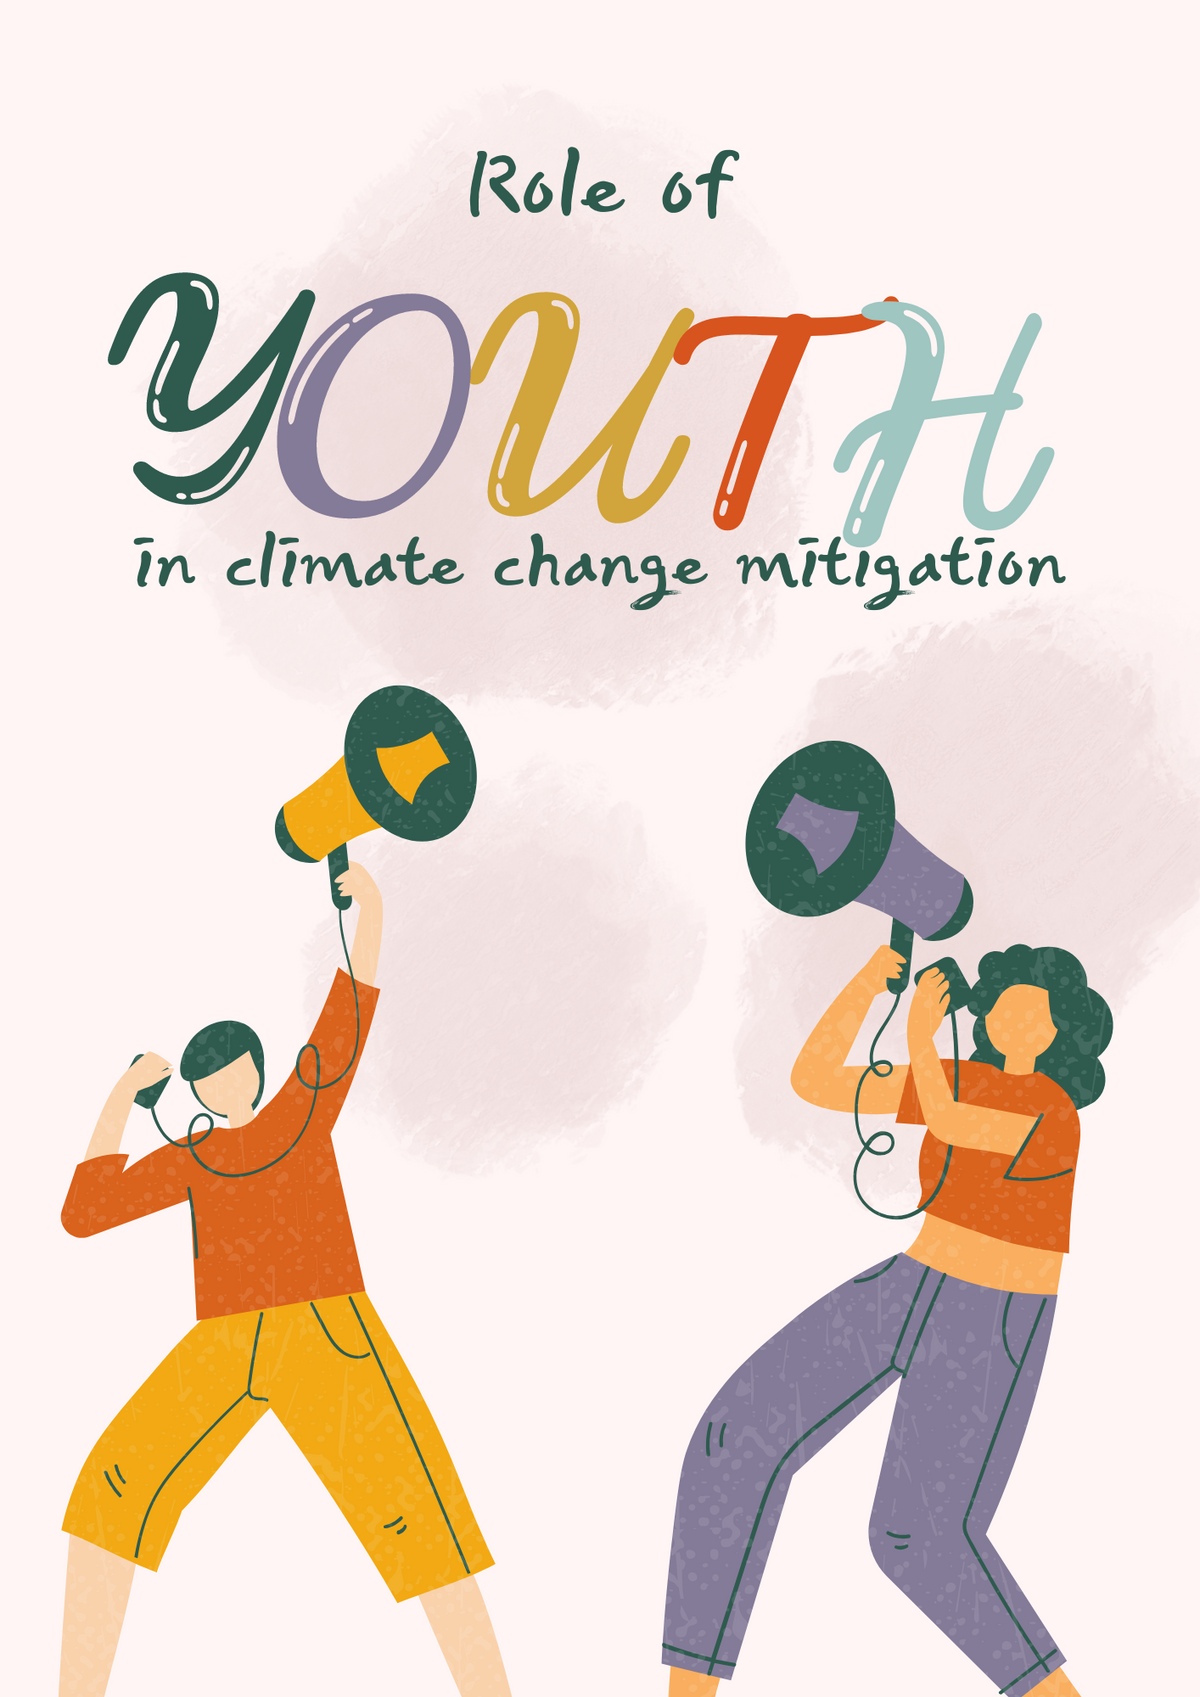 Role of Youth to tackle climate change